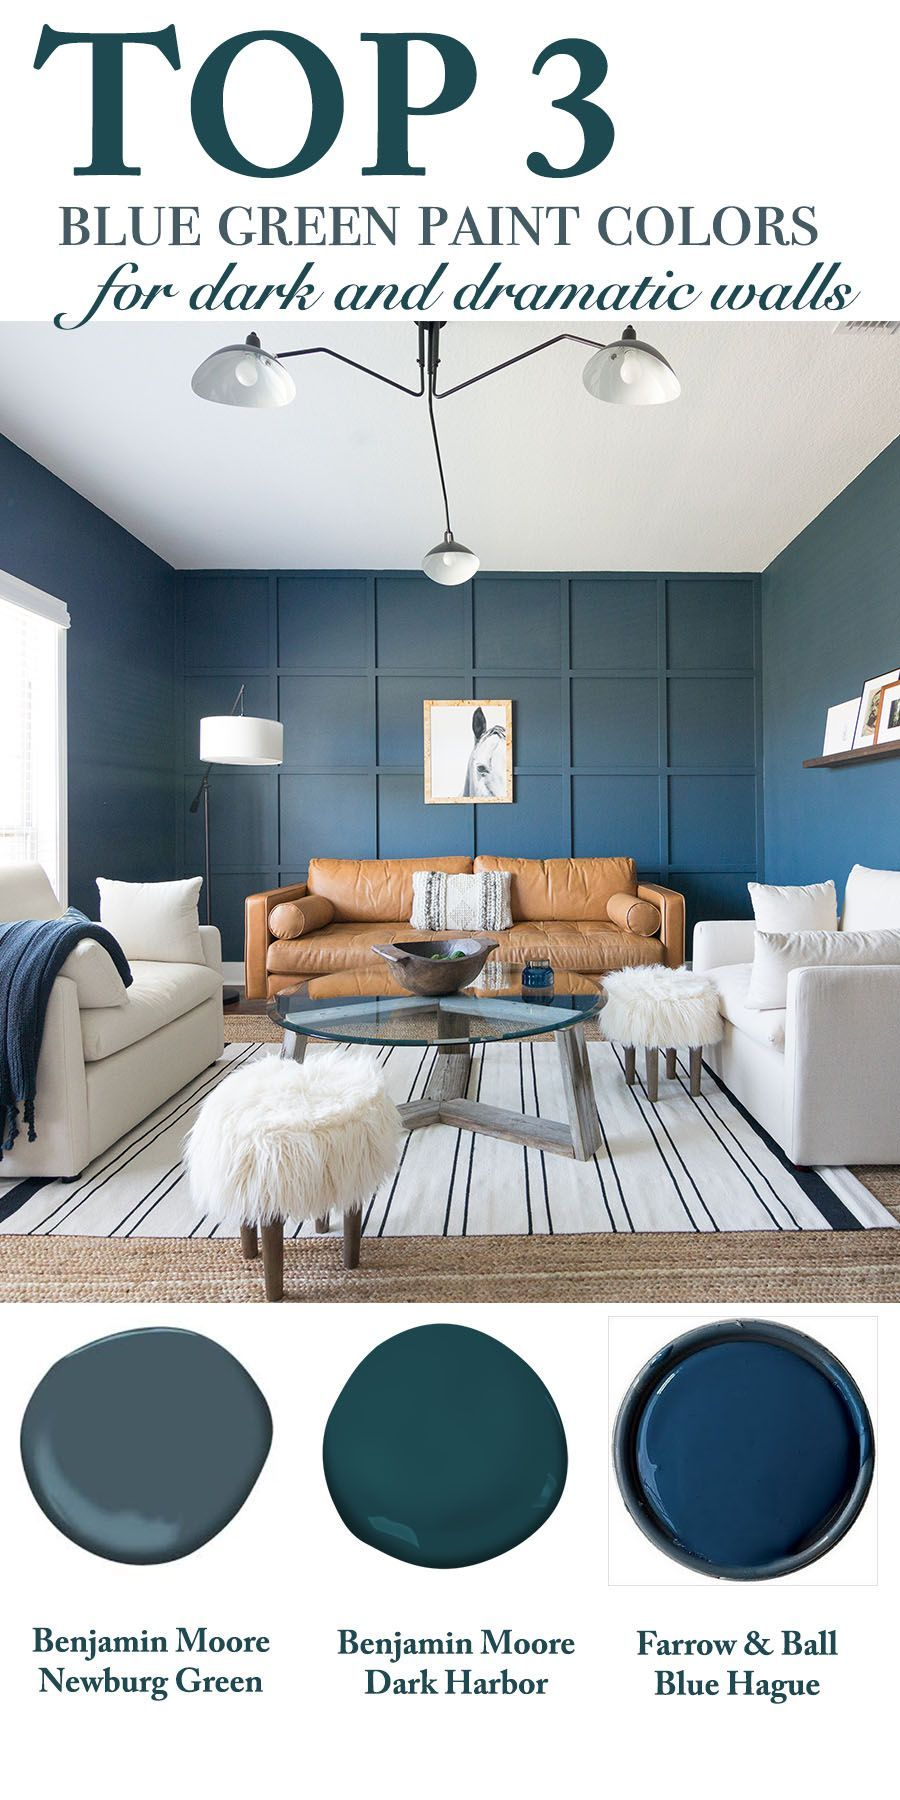 Top 3 Blue Green Paint Colors For Dark And Dramatic Walls Color for dimensions 900 X 1800